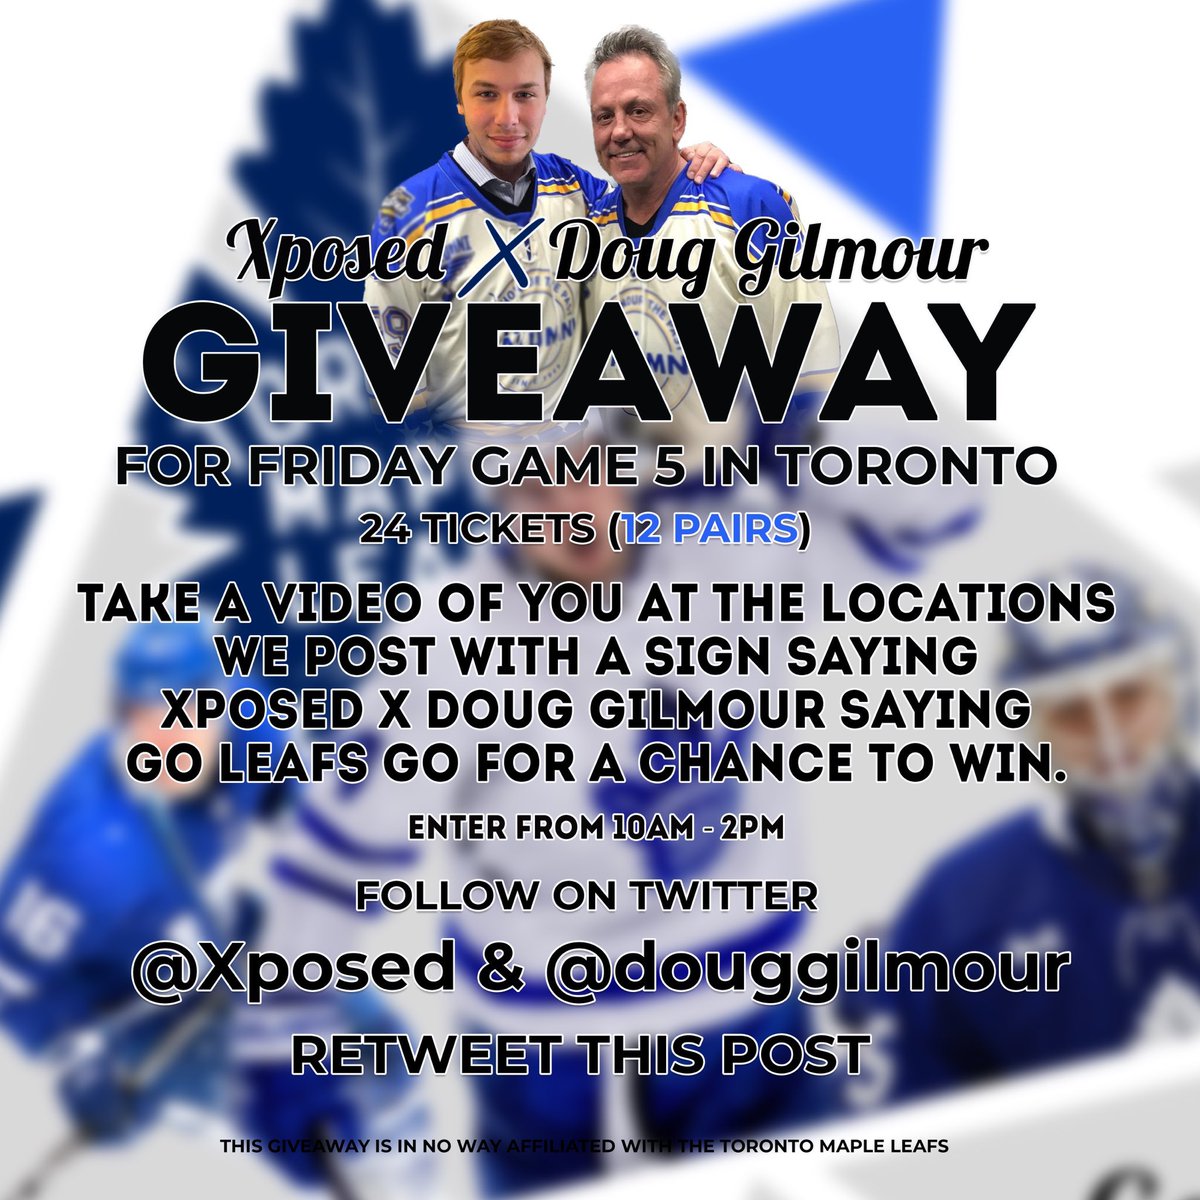 I’ve teamed up with @xposedtwitch to gift some tickets to tonight’s game!

Xposed x Doug Gilmour Ticket Giveaway for Fridays Game 5 in Toronto

24 Tickets total (12 Pairs)

Enter from 10 AM - 2 PM.

Take a video of you at the locations we post with a Sign saying Xposed X Doug…